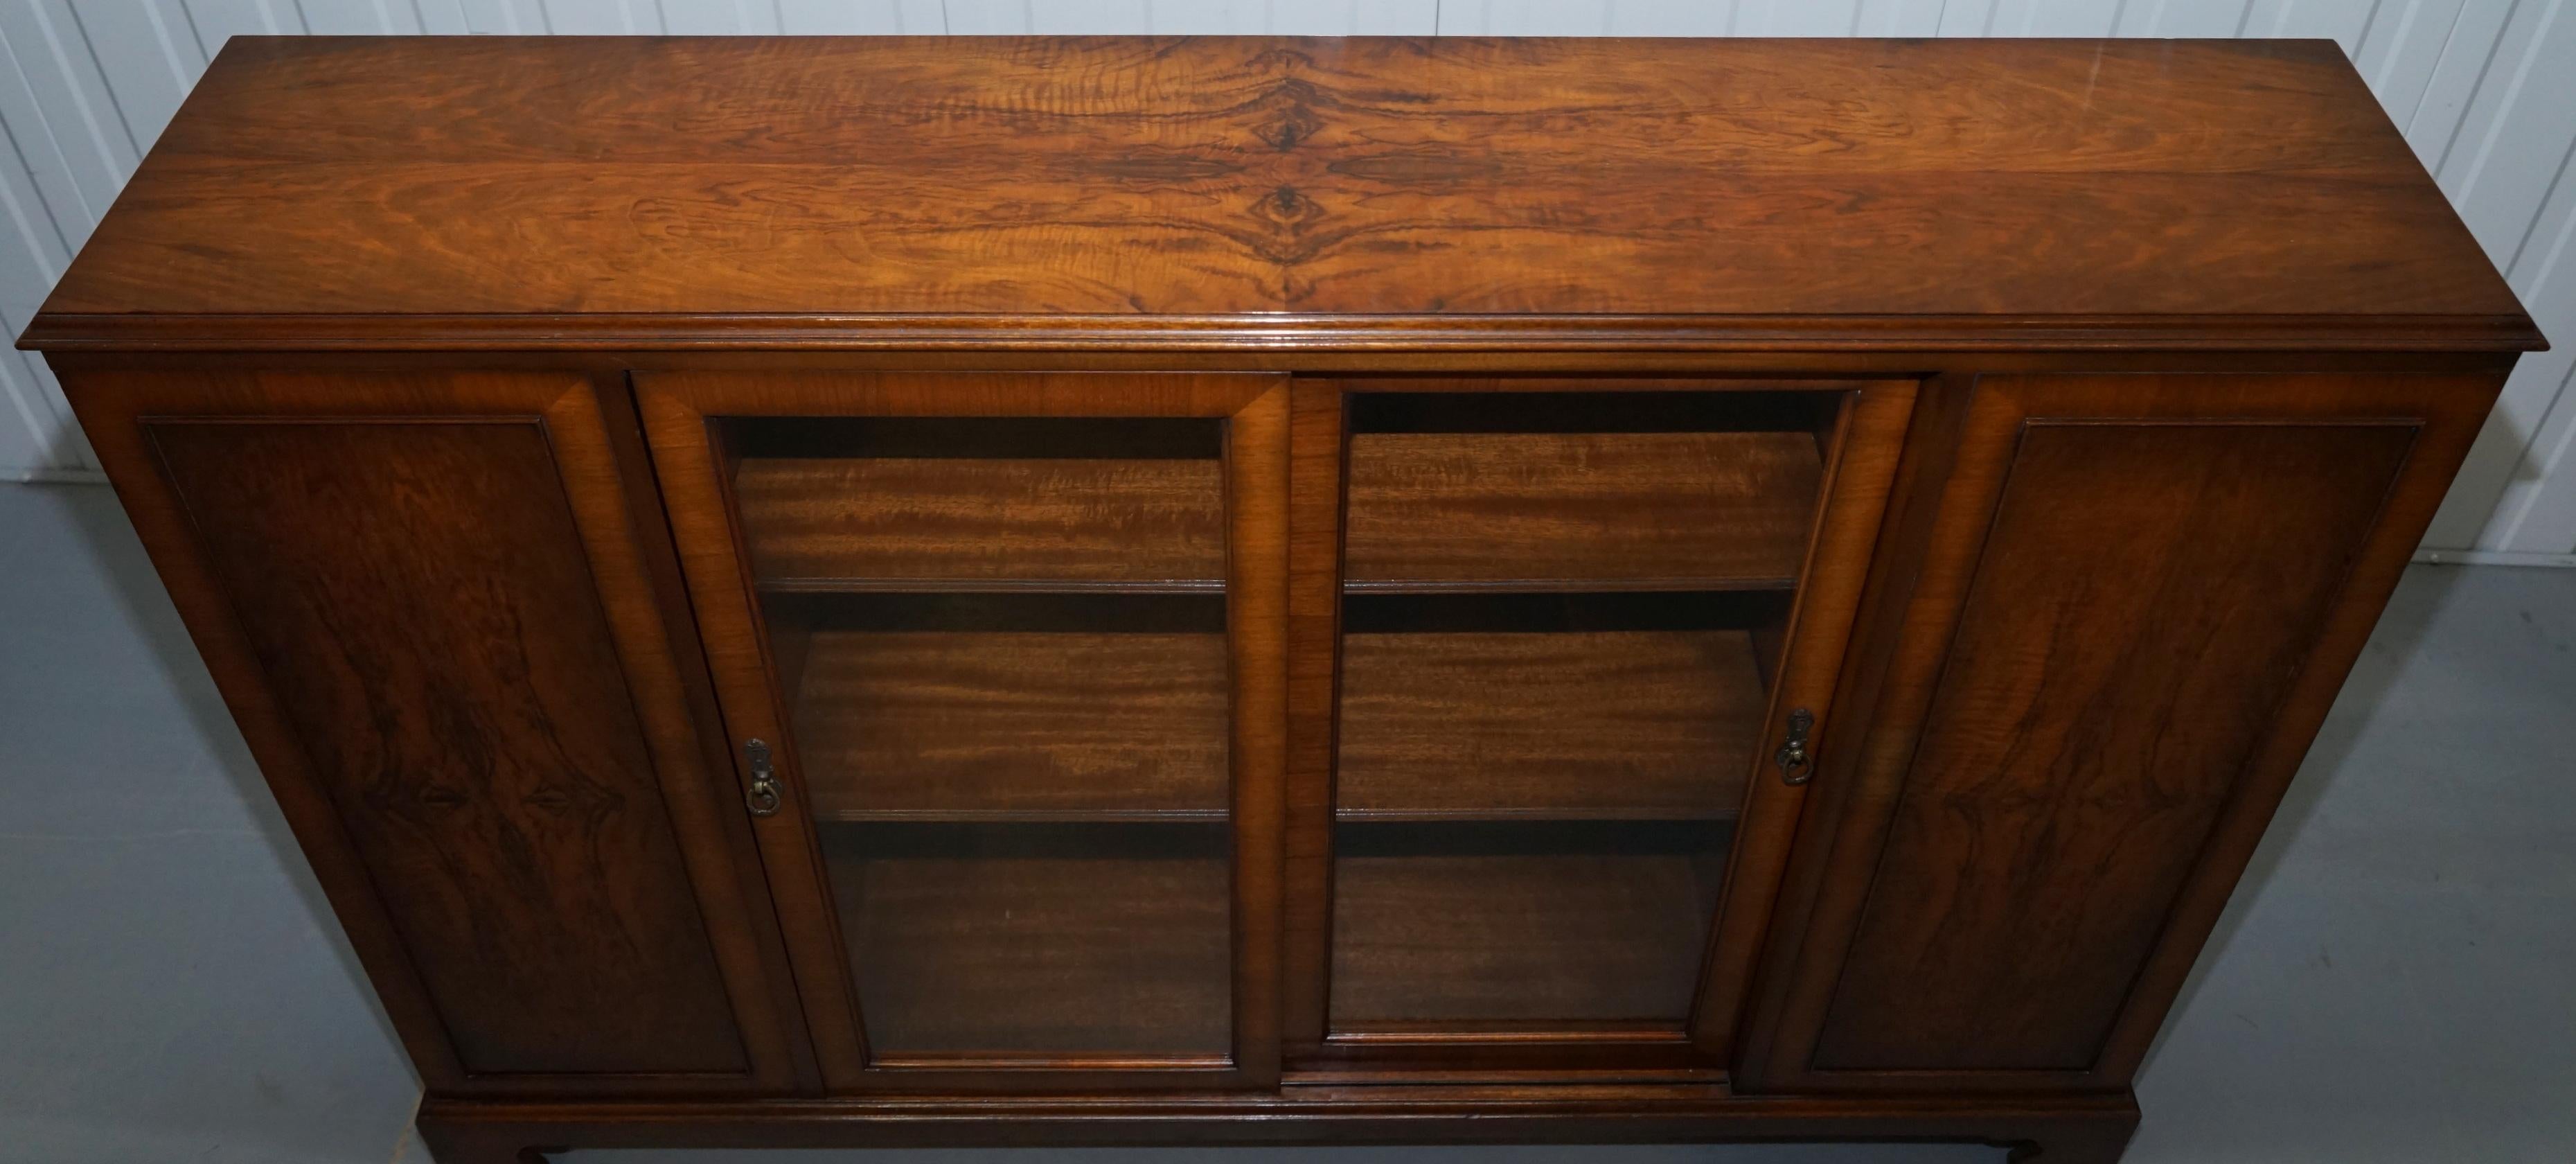 Matching Pair of Stunning Figured Walnut Sideboard Bookcases with Side Cupboards 5